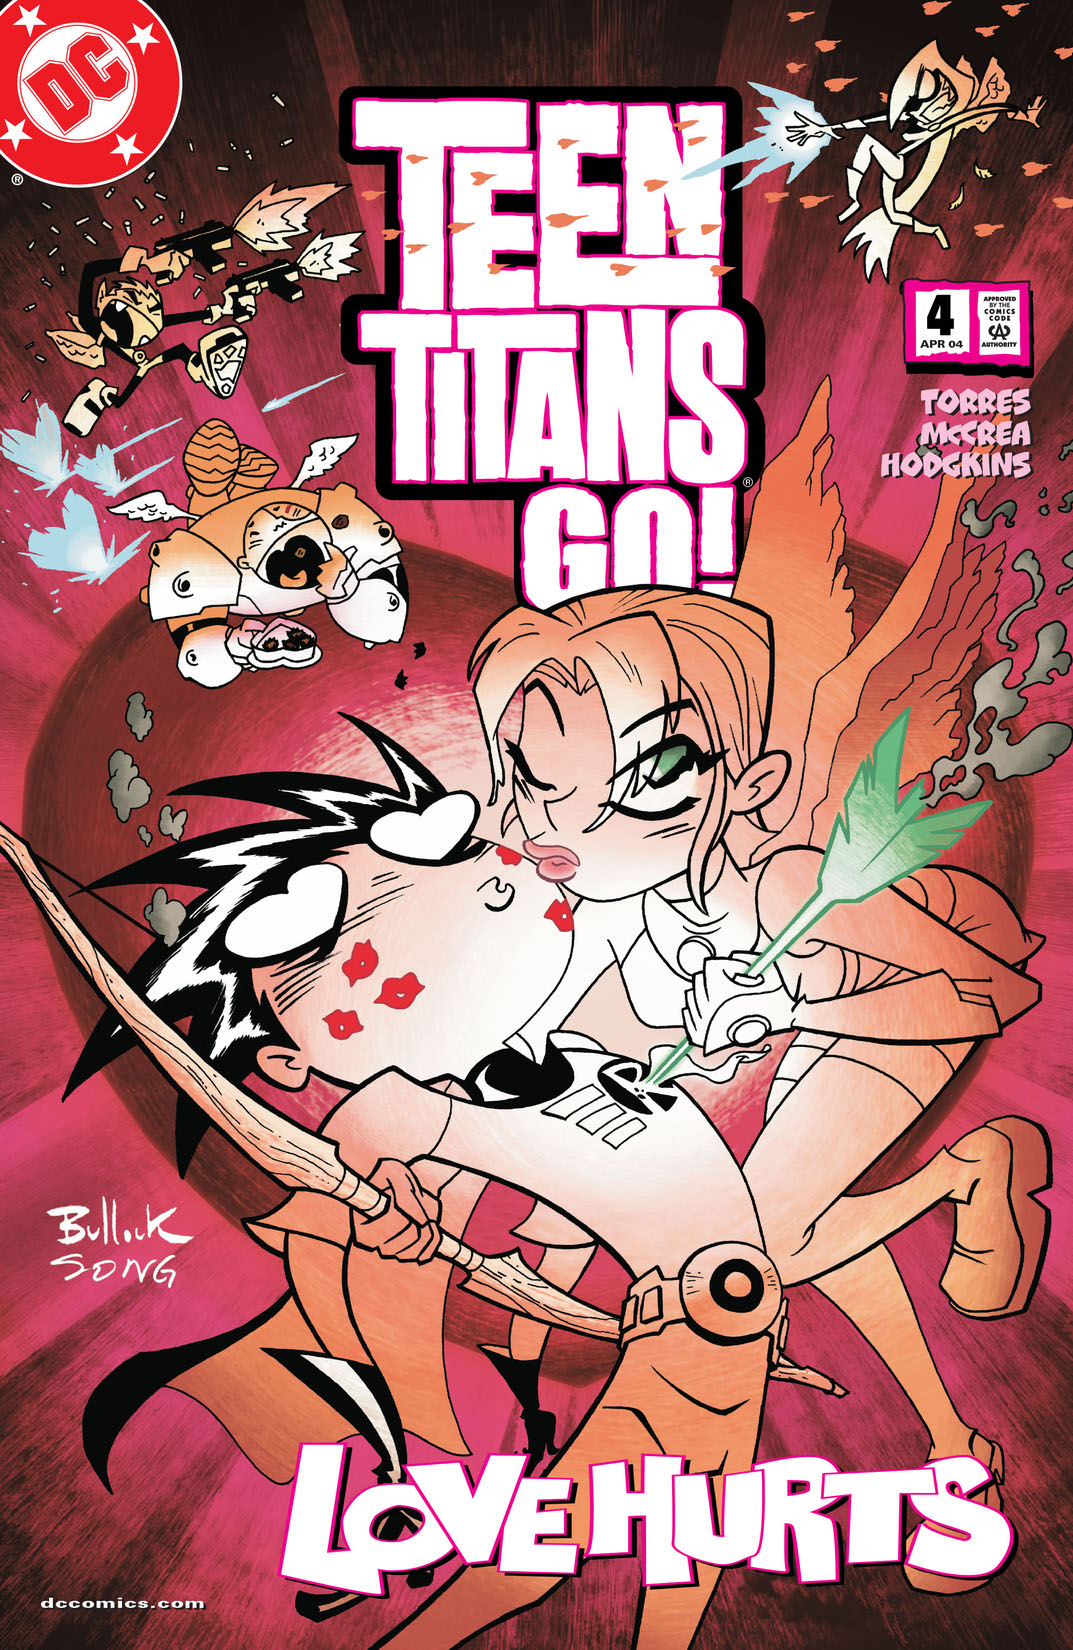 Teen Titans Go! (2003-) #4 preview images